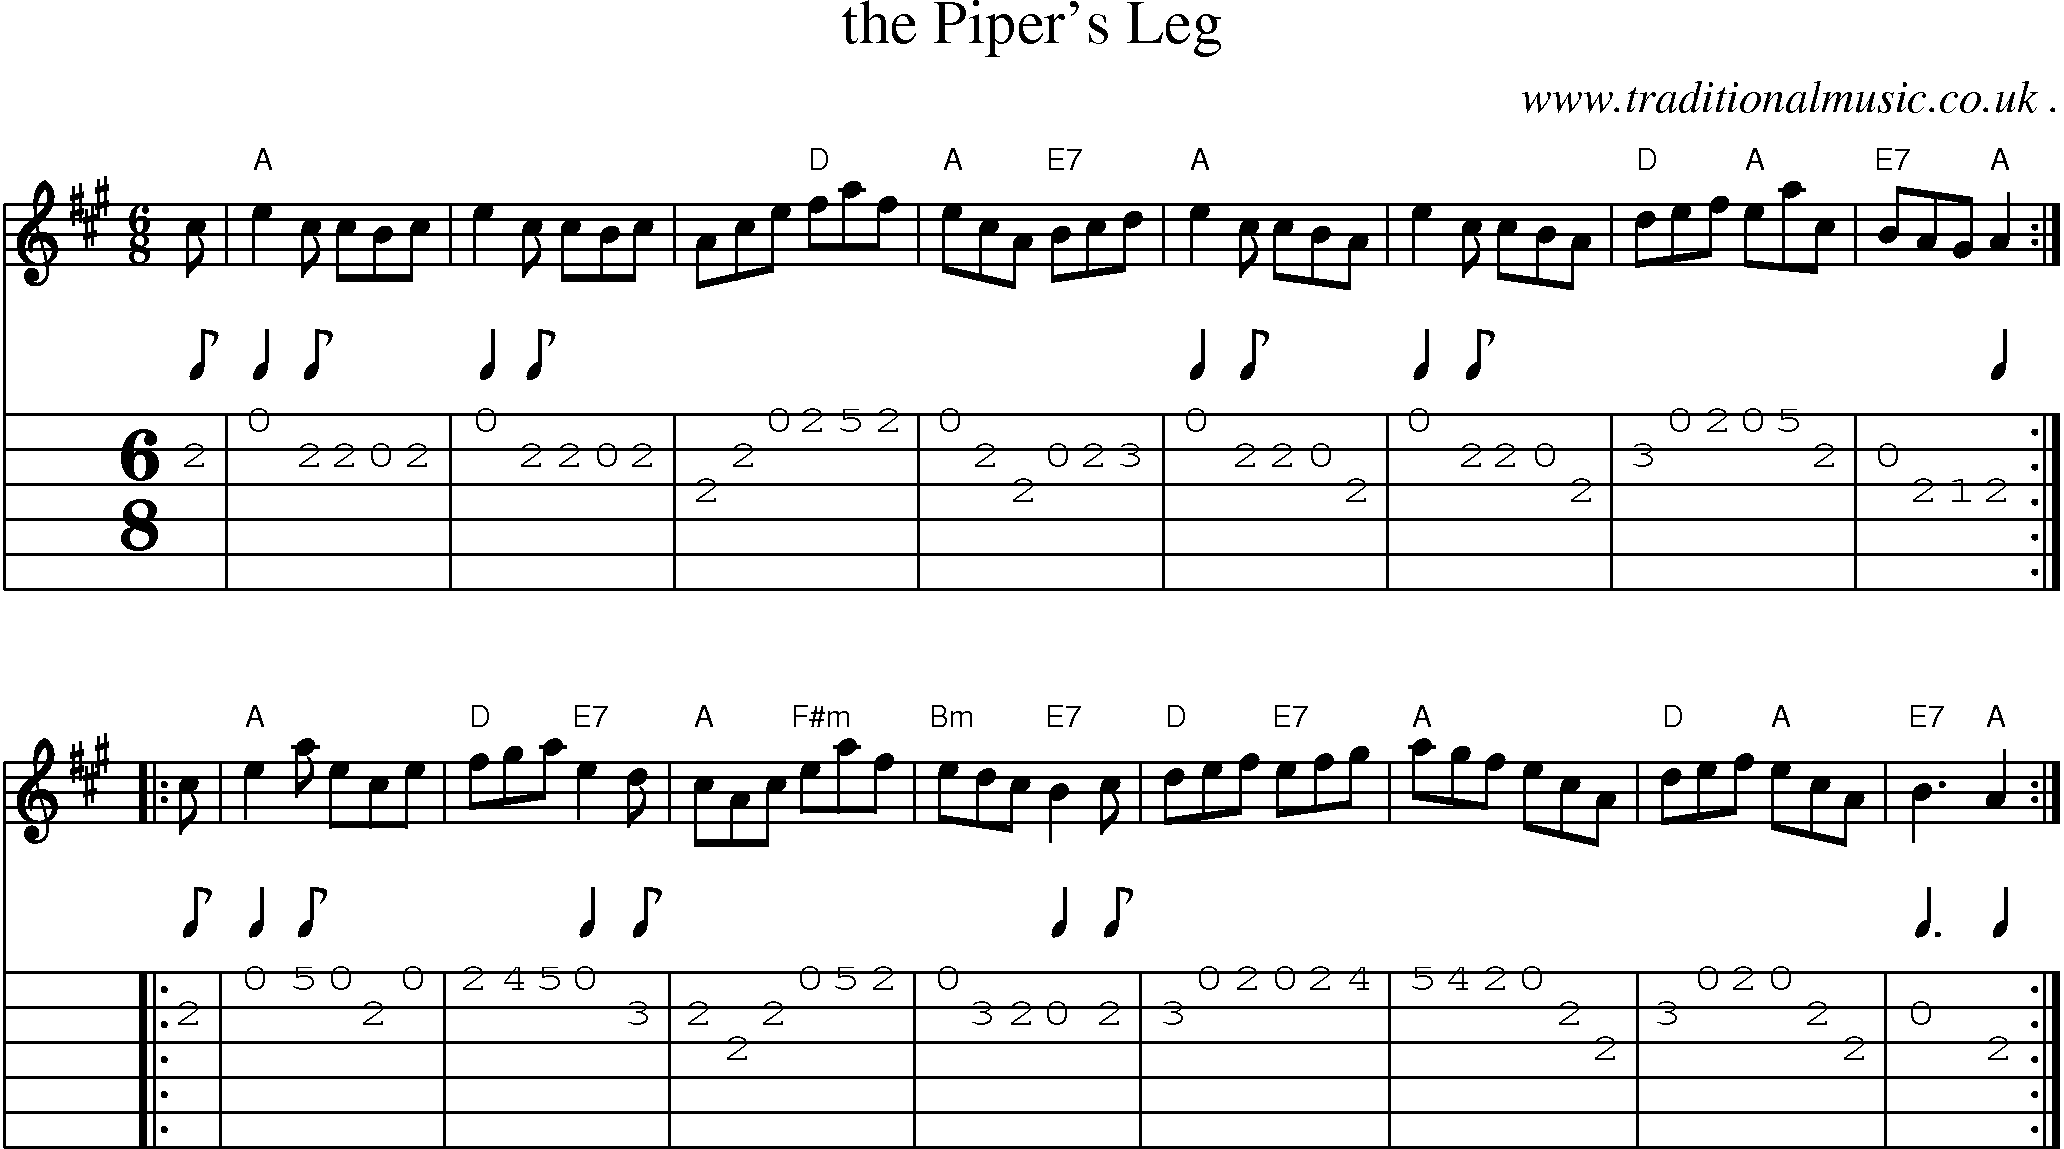 Sheet-music  score, Chords and Guitar Tabs for The Pipers Leg